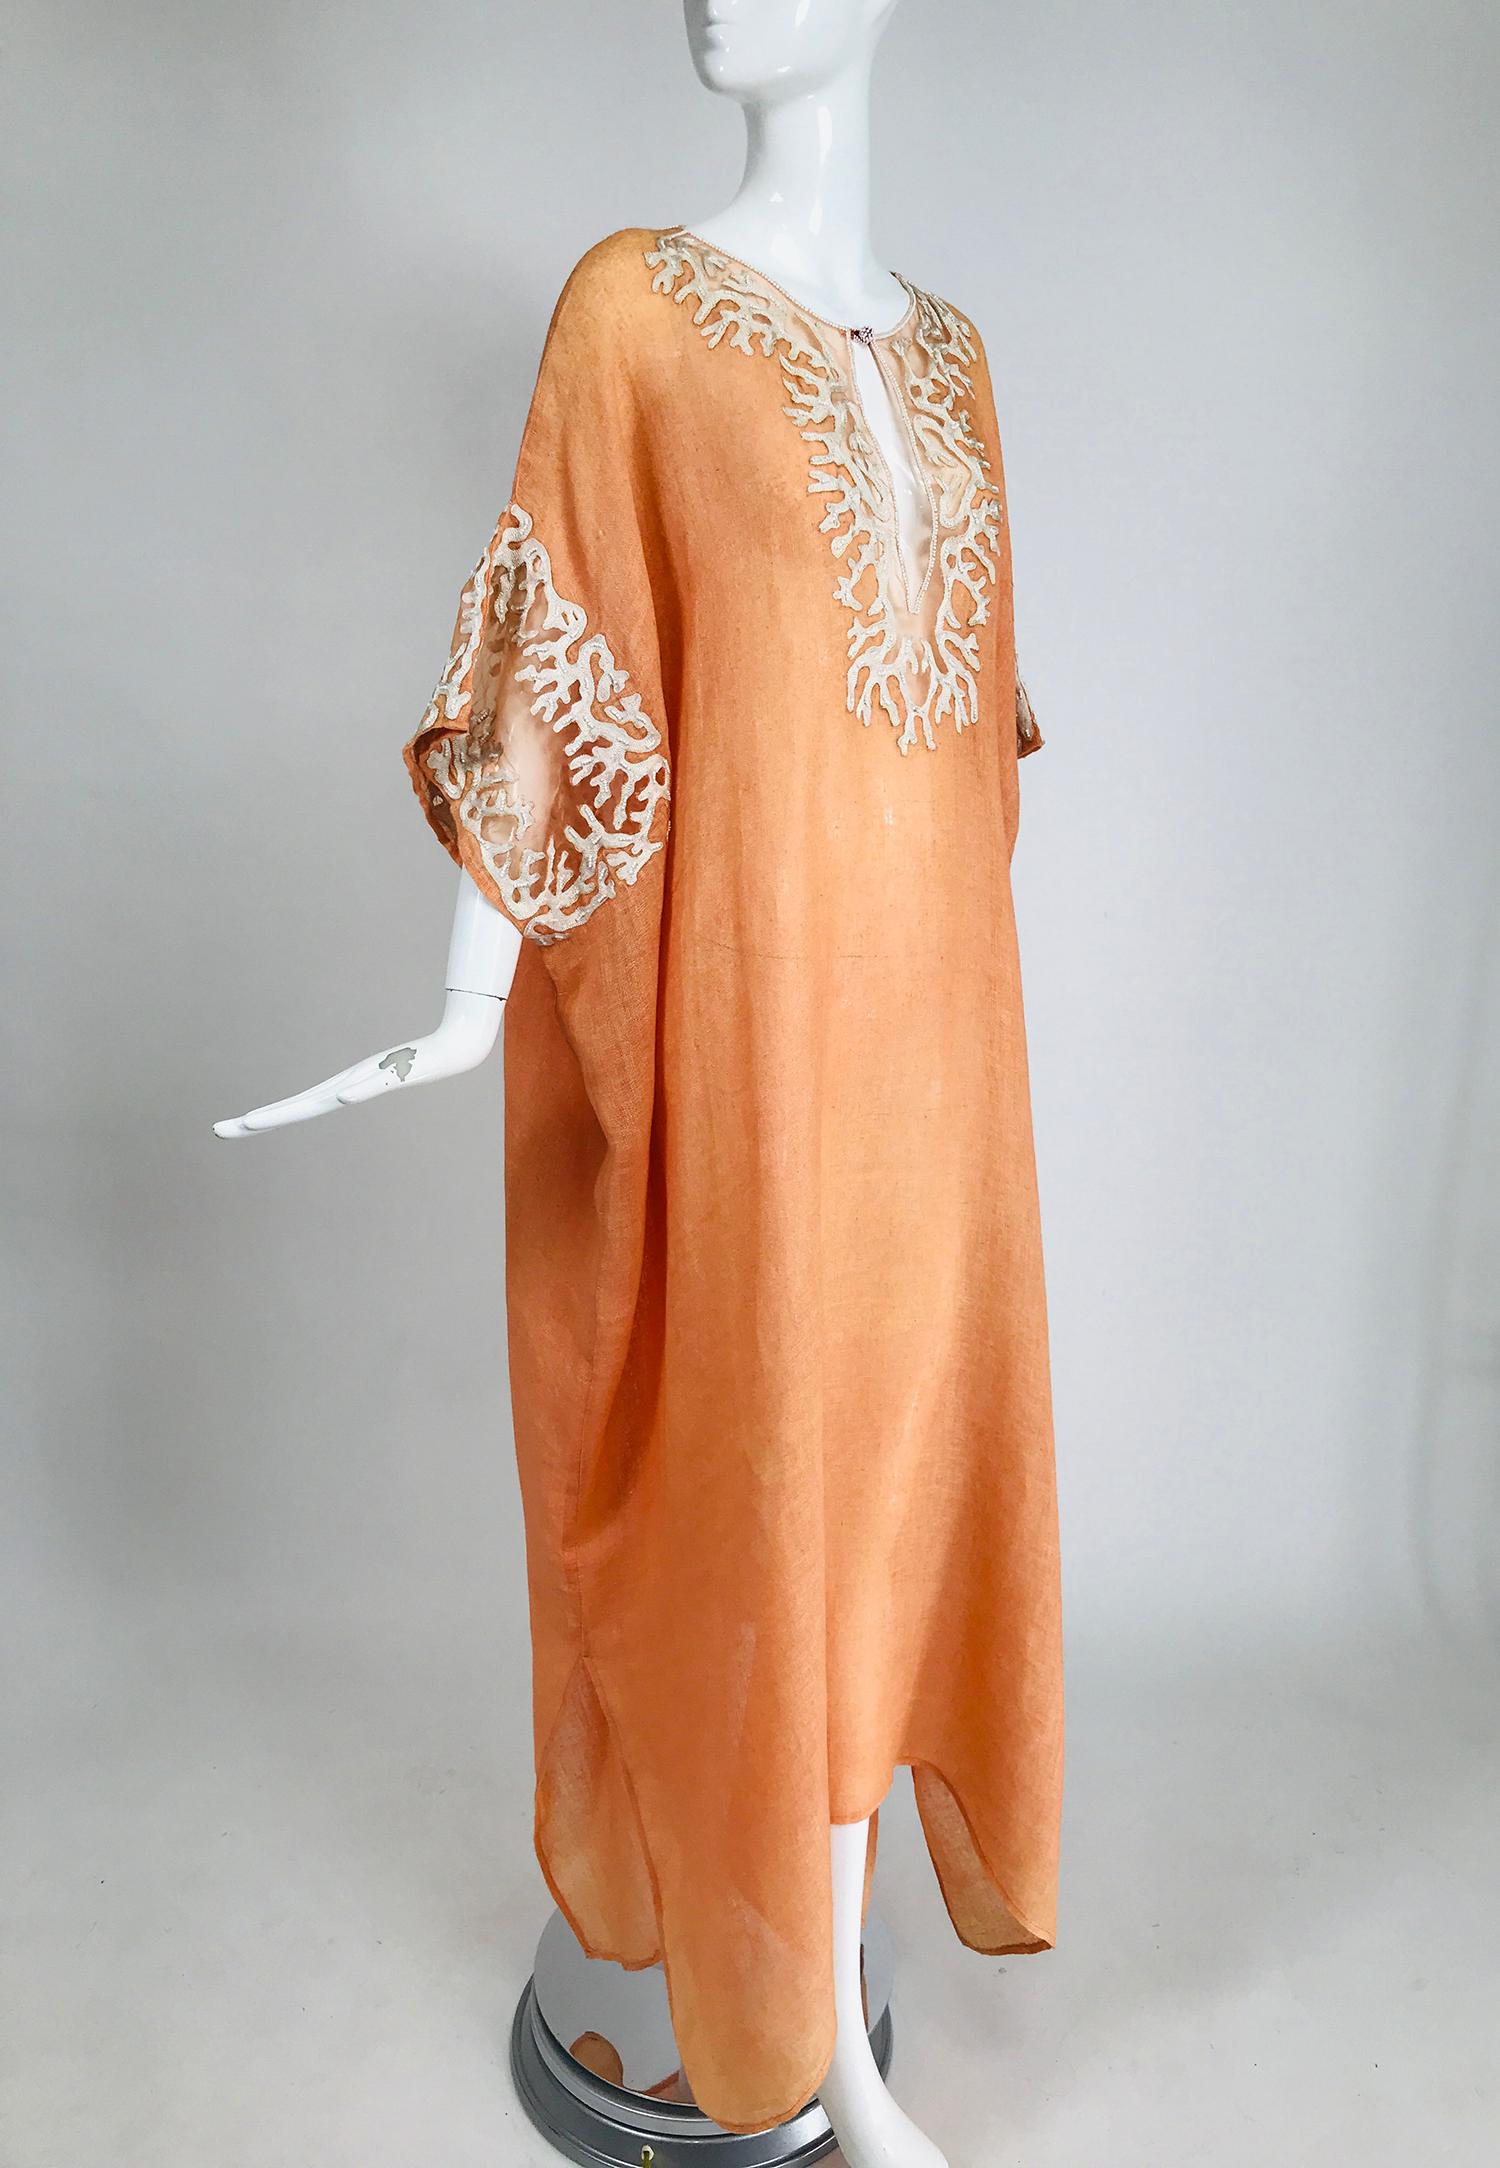 Jeannie McQueeny coral 100% loose weave linen caftan with white coral design appliques that are embellished with white beads at the neckline and arm openings, the appliques are interspersed with sheer organza in coral. The neckline is outlined with